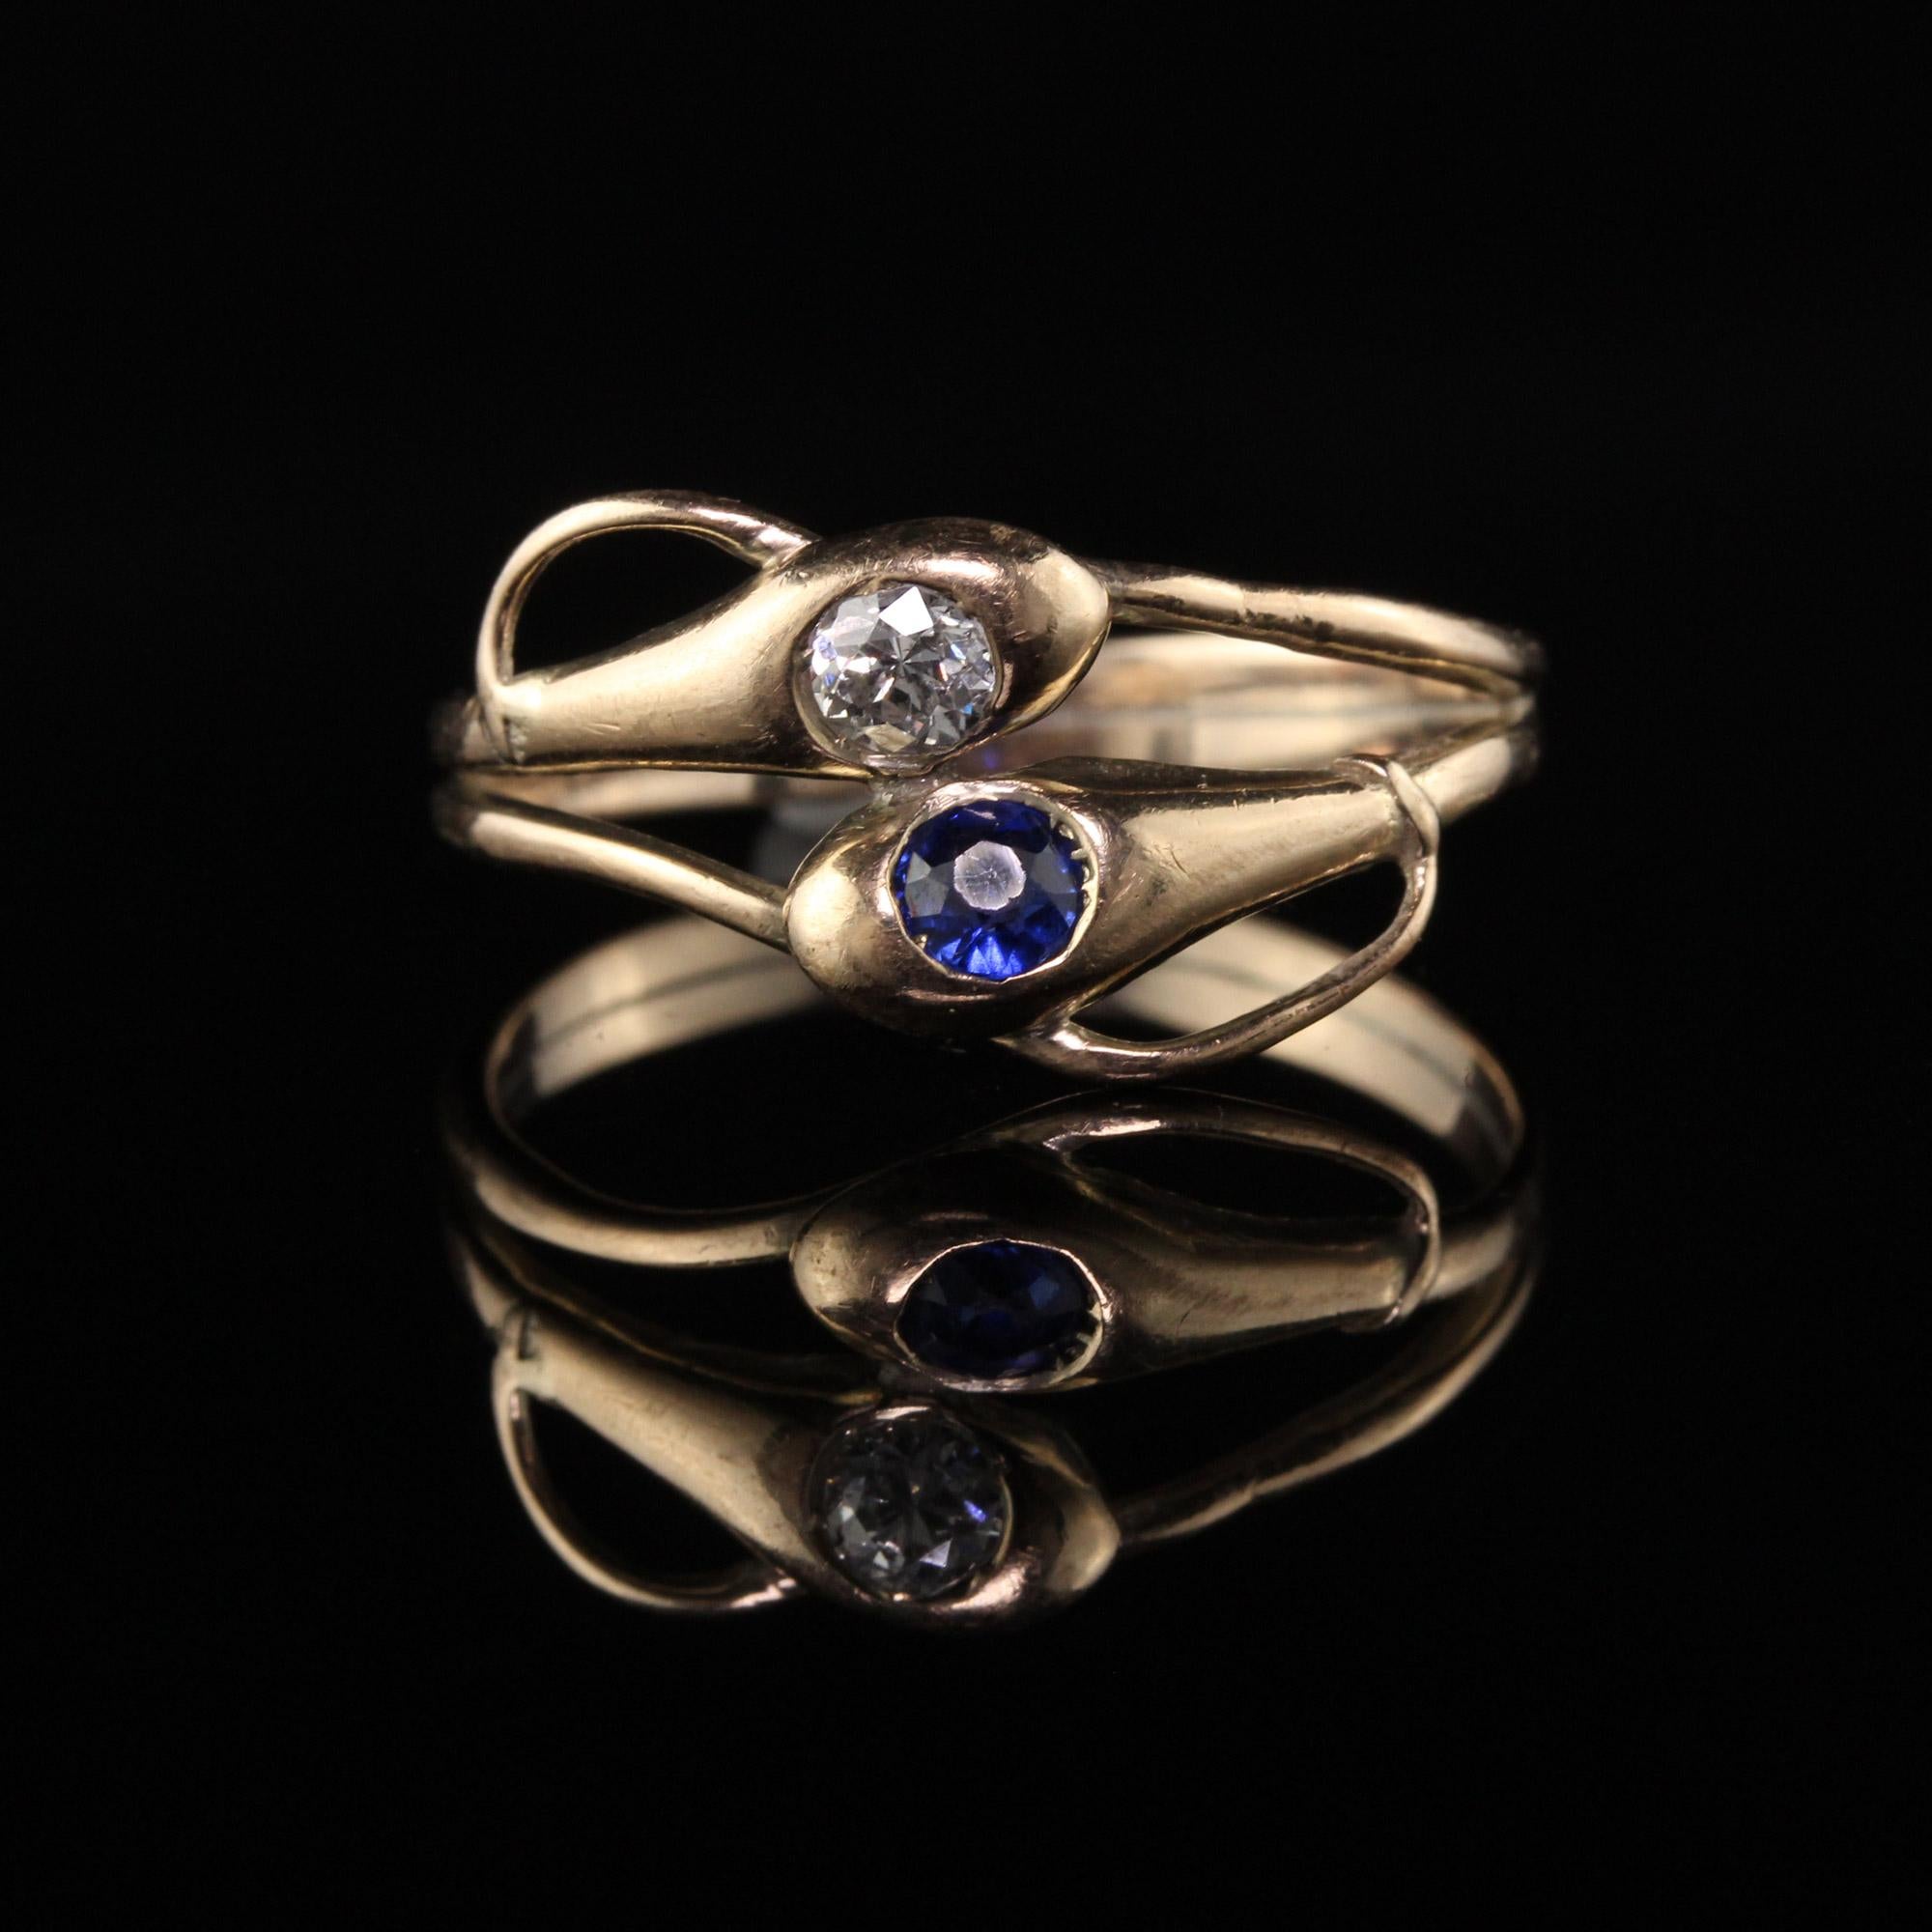 Old European Cut Antique Victorian 12 Karat Yellow Gold Diamond and Sapphire Double Snake Ring